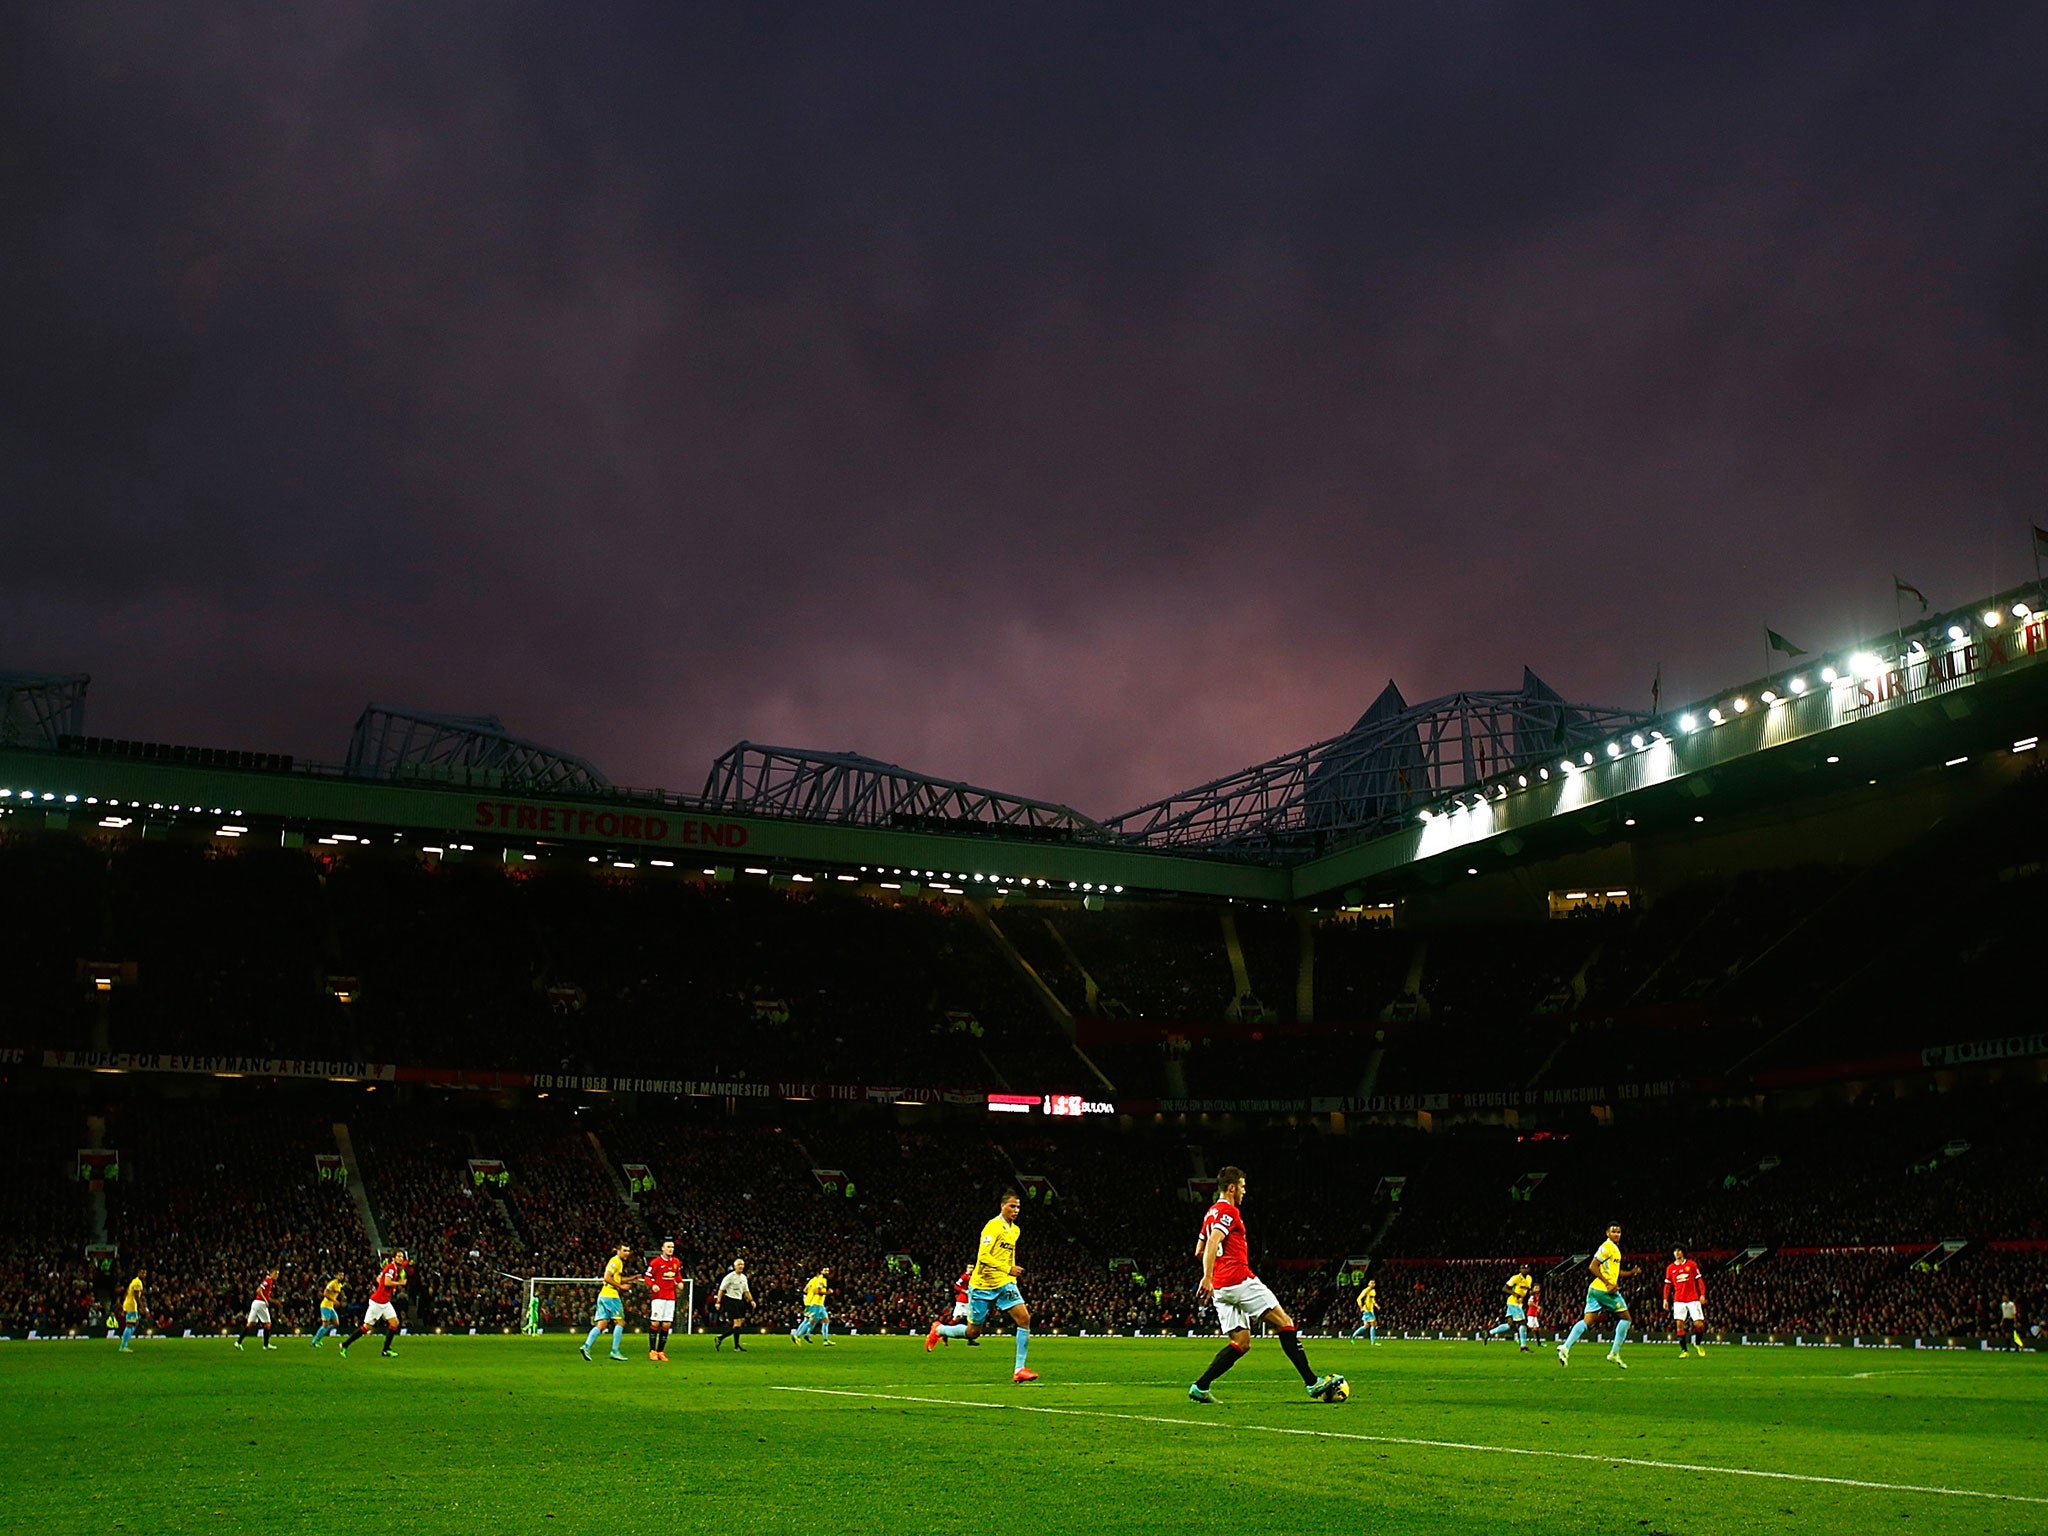 A shot of Old Trafford during Manchester United vs Crystal Palace back in November